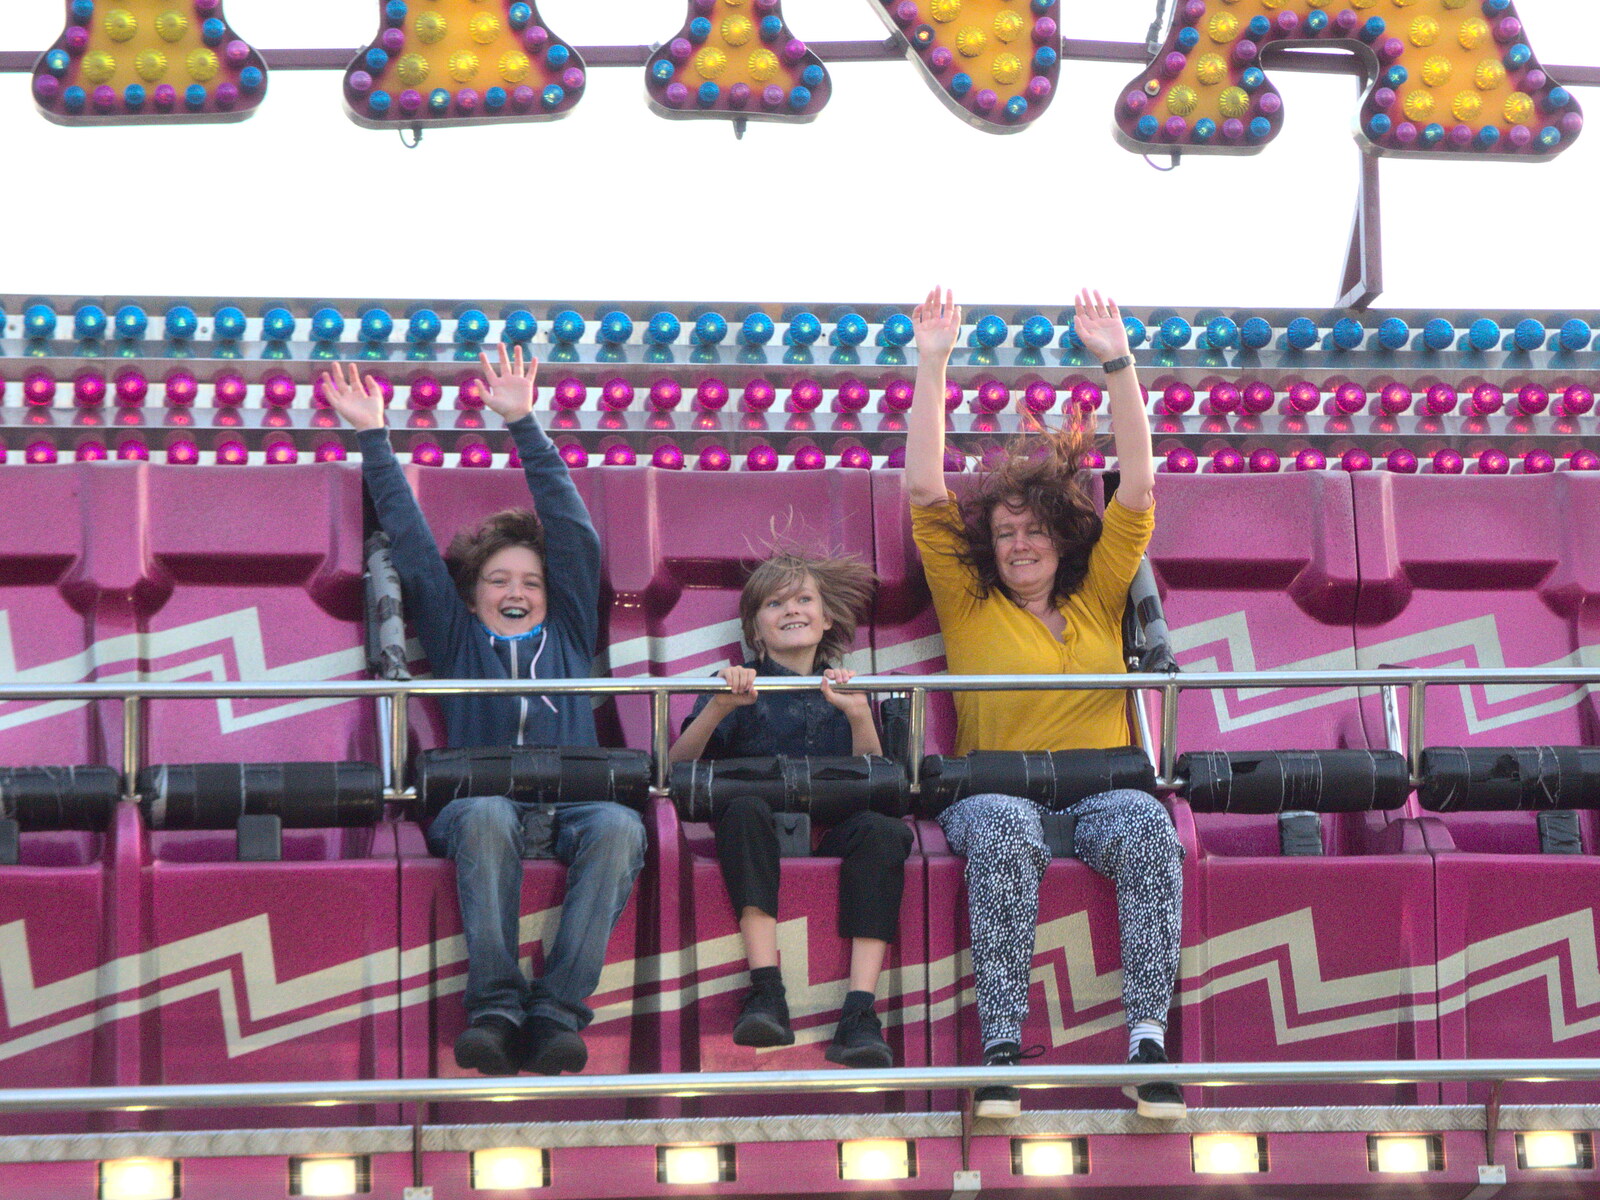 There's a hands-in-the-air moment from A Few Hours at the Fair, Fair Green, Diss, Norfolk - 5th September 2021